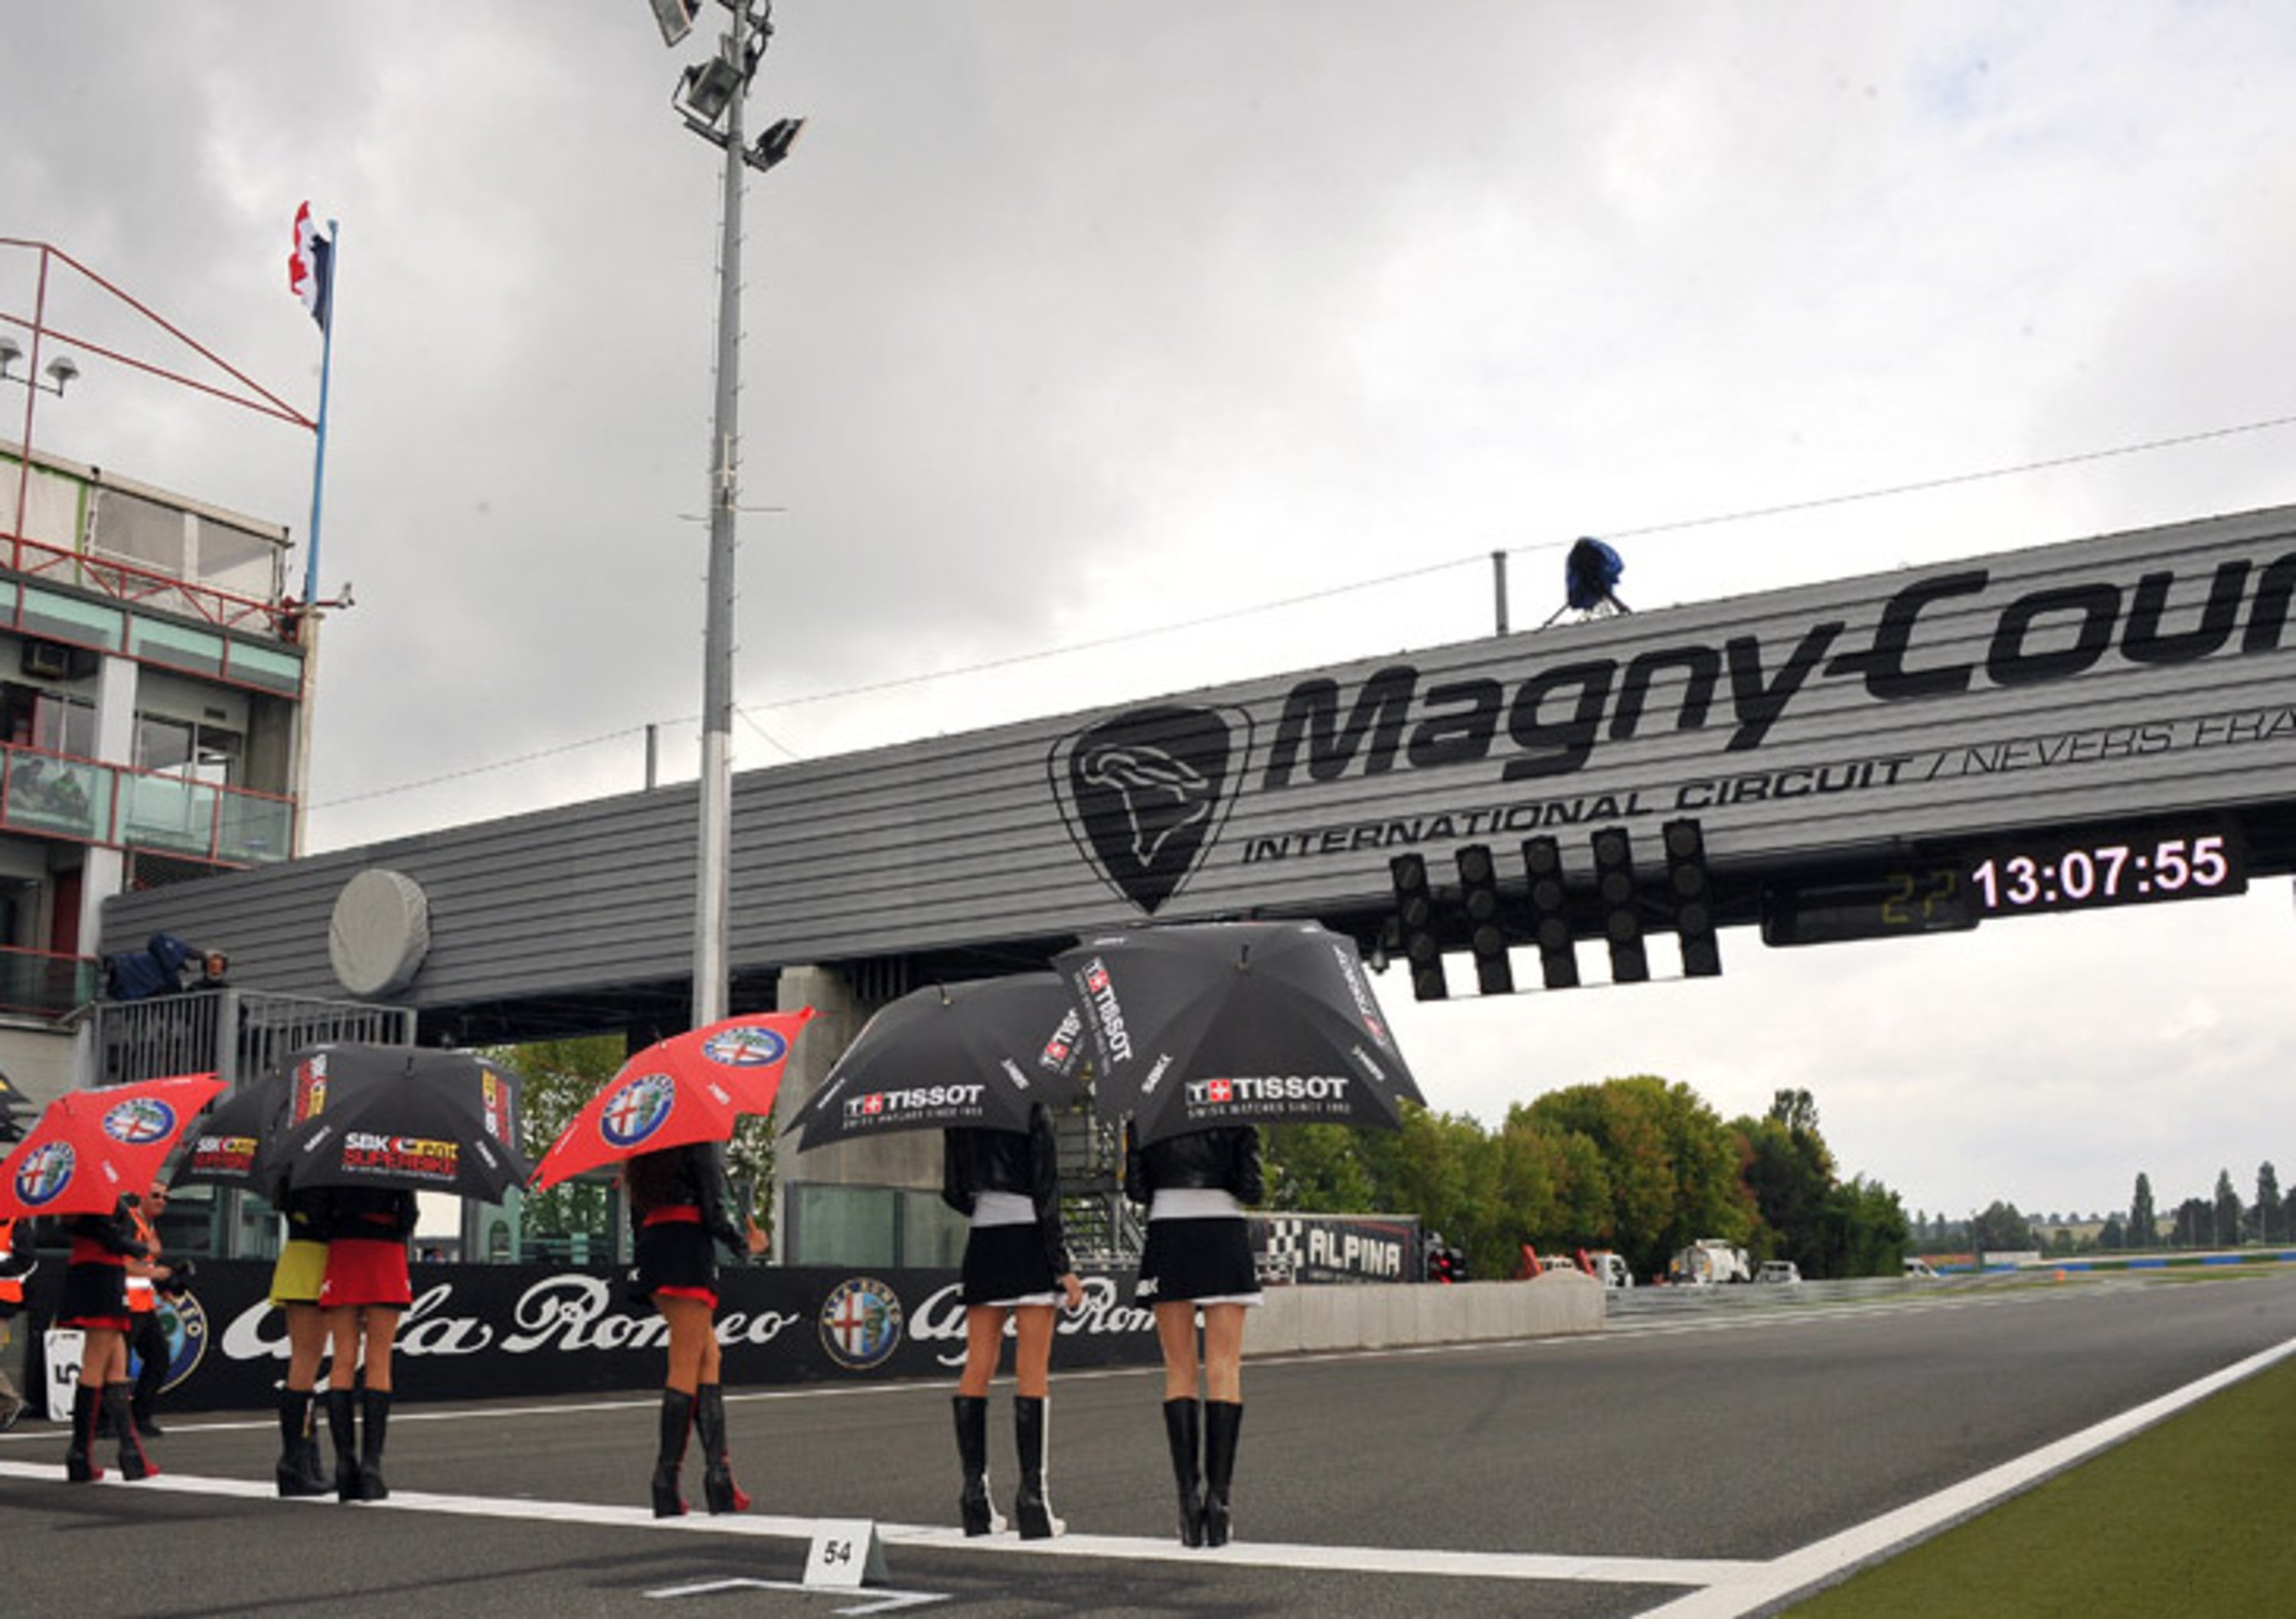 Penultimo round SBK a Magny Cours